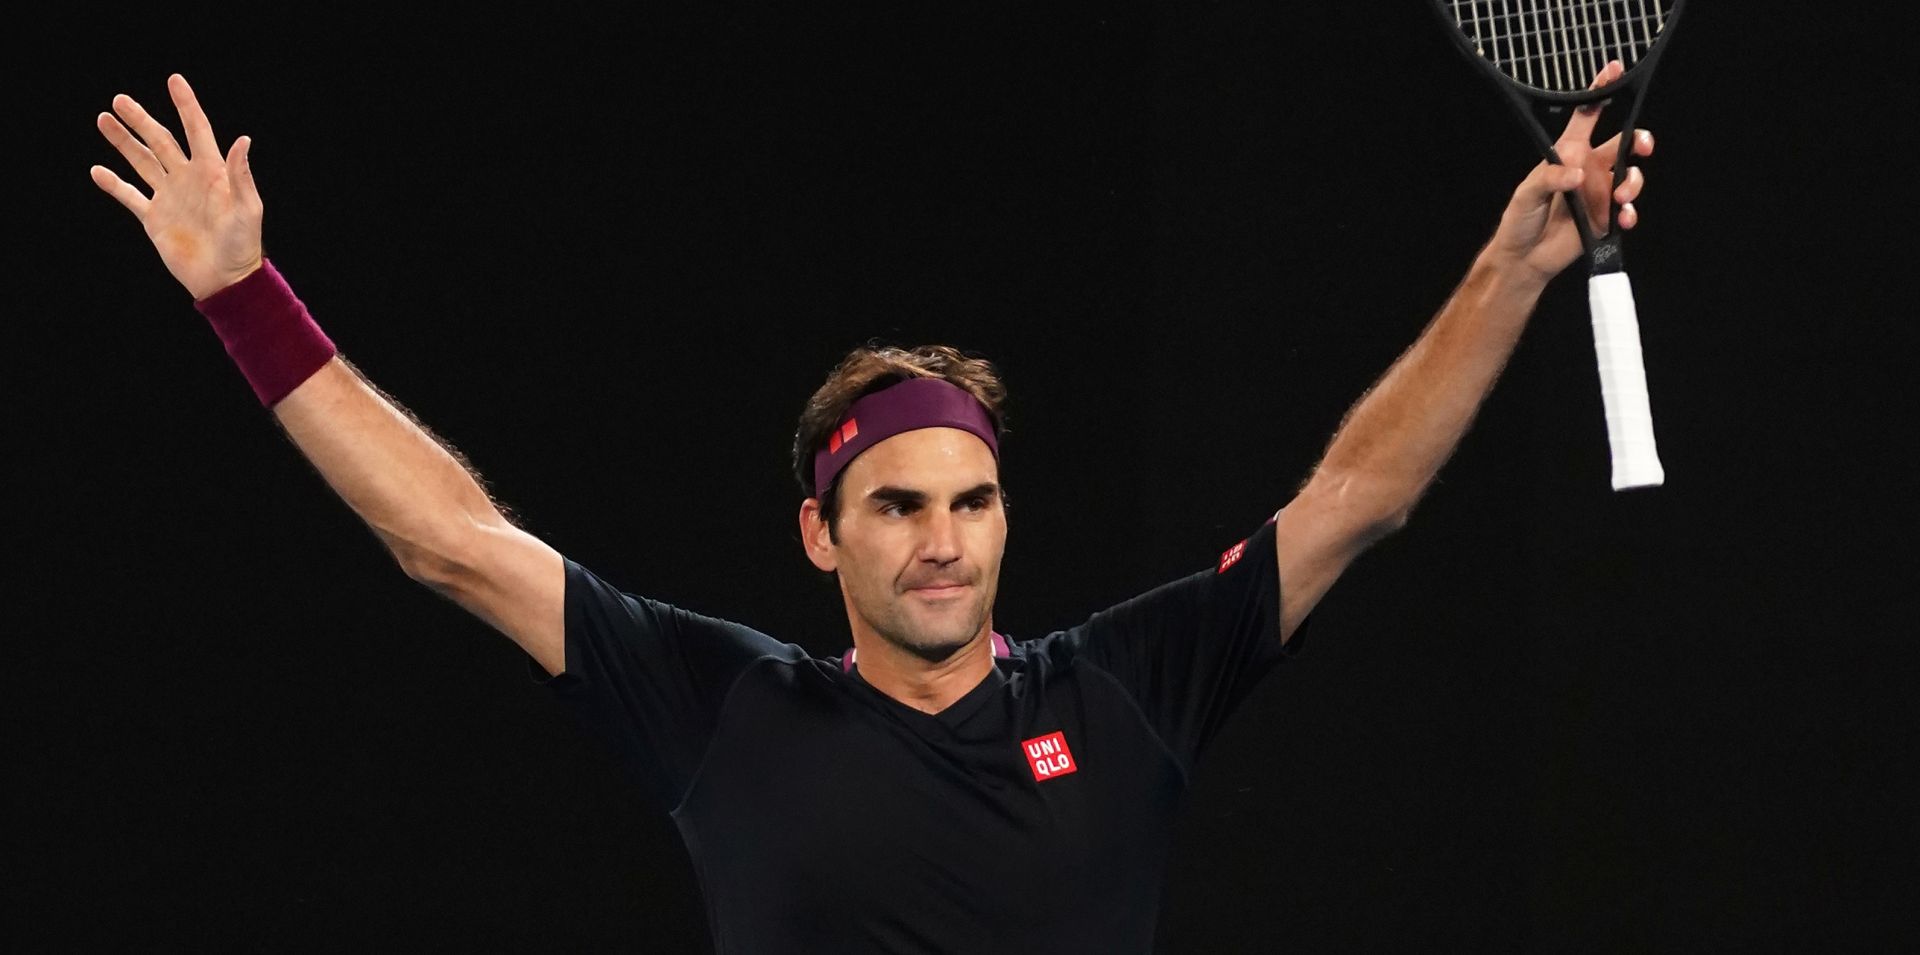 epa08159326 Roger Federer of Switzerland celebrates after winning his third round match against John Millman of Australia on day five of the Australian Open tennis tournament at Rod Laver Arena in Melbourne, Australia, 24 January 2020.  EPA/SCOTT BARBOUR AUSTRALIA AND NEW ZEALAND OUT